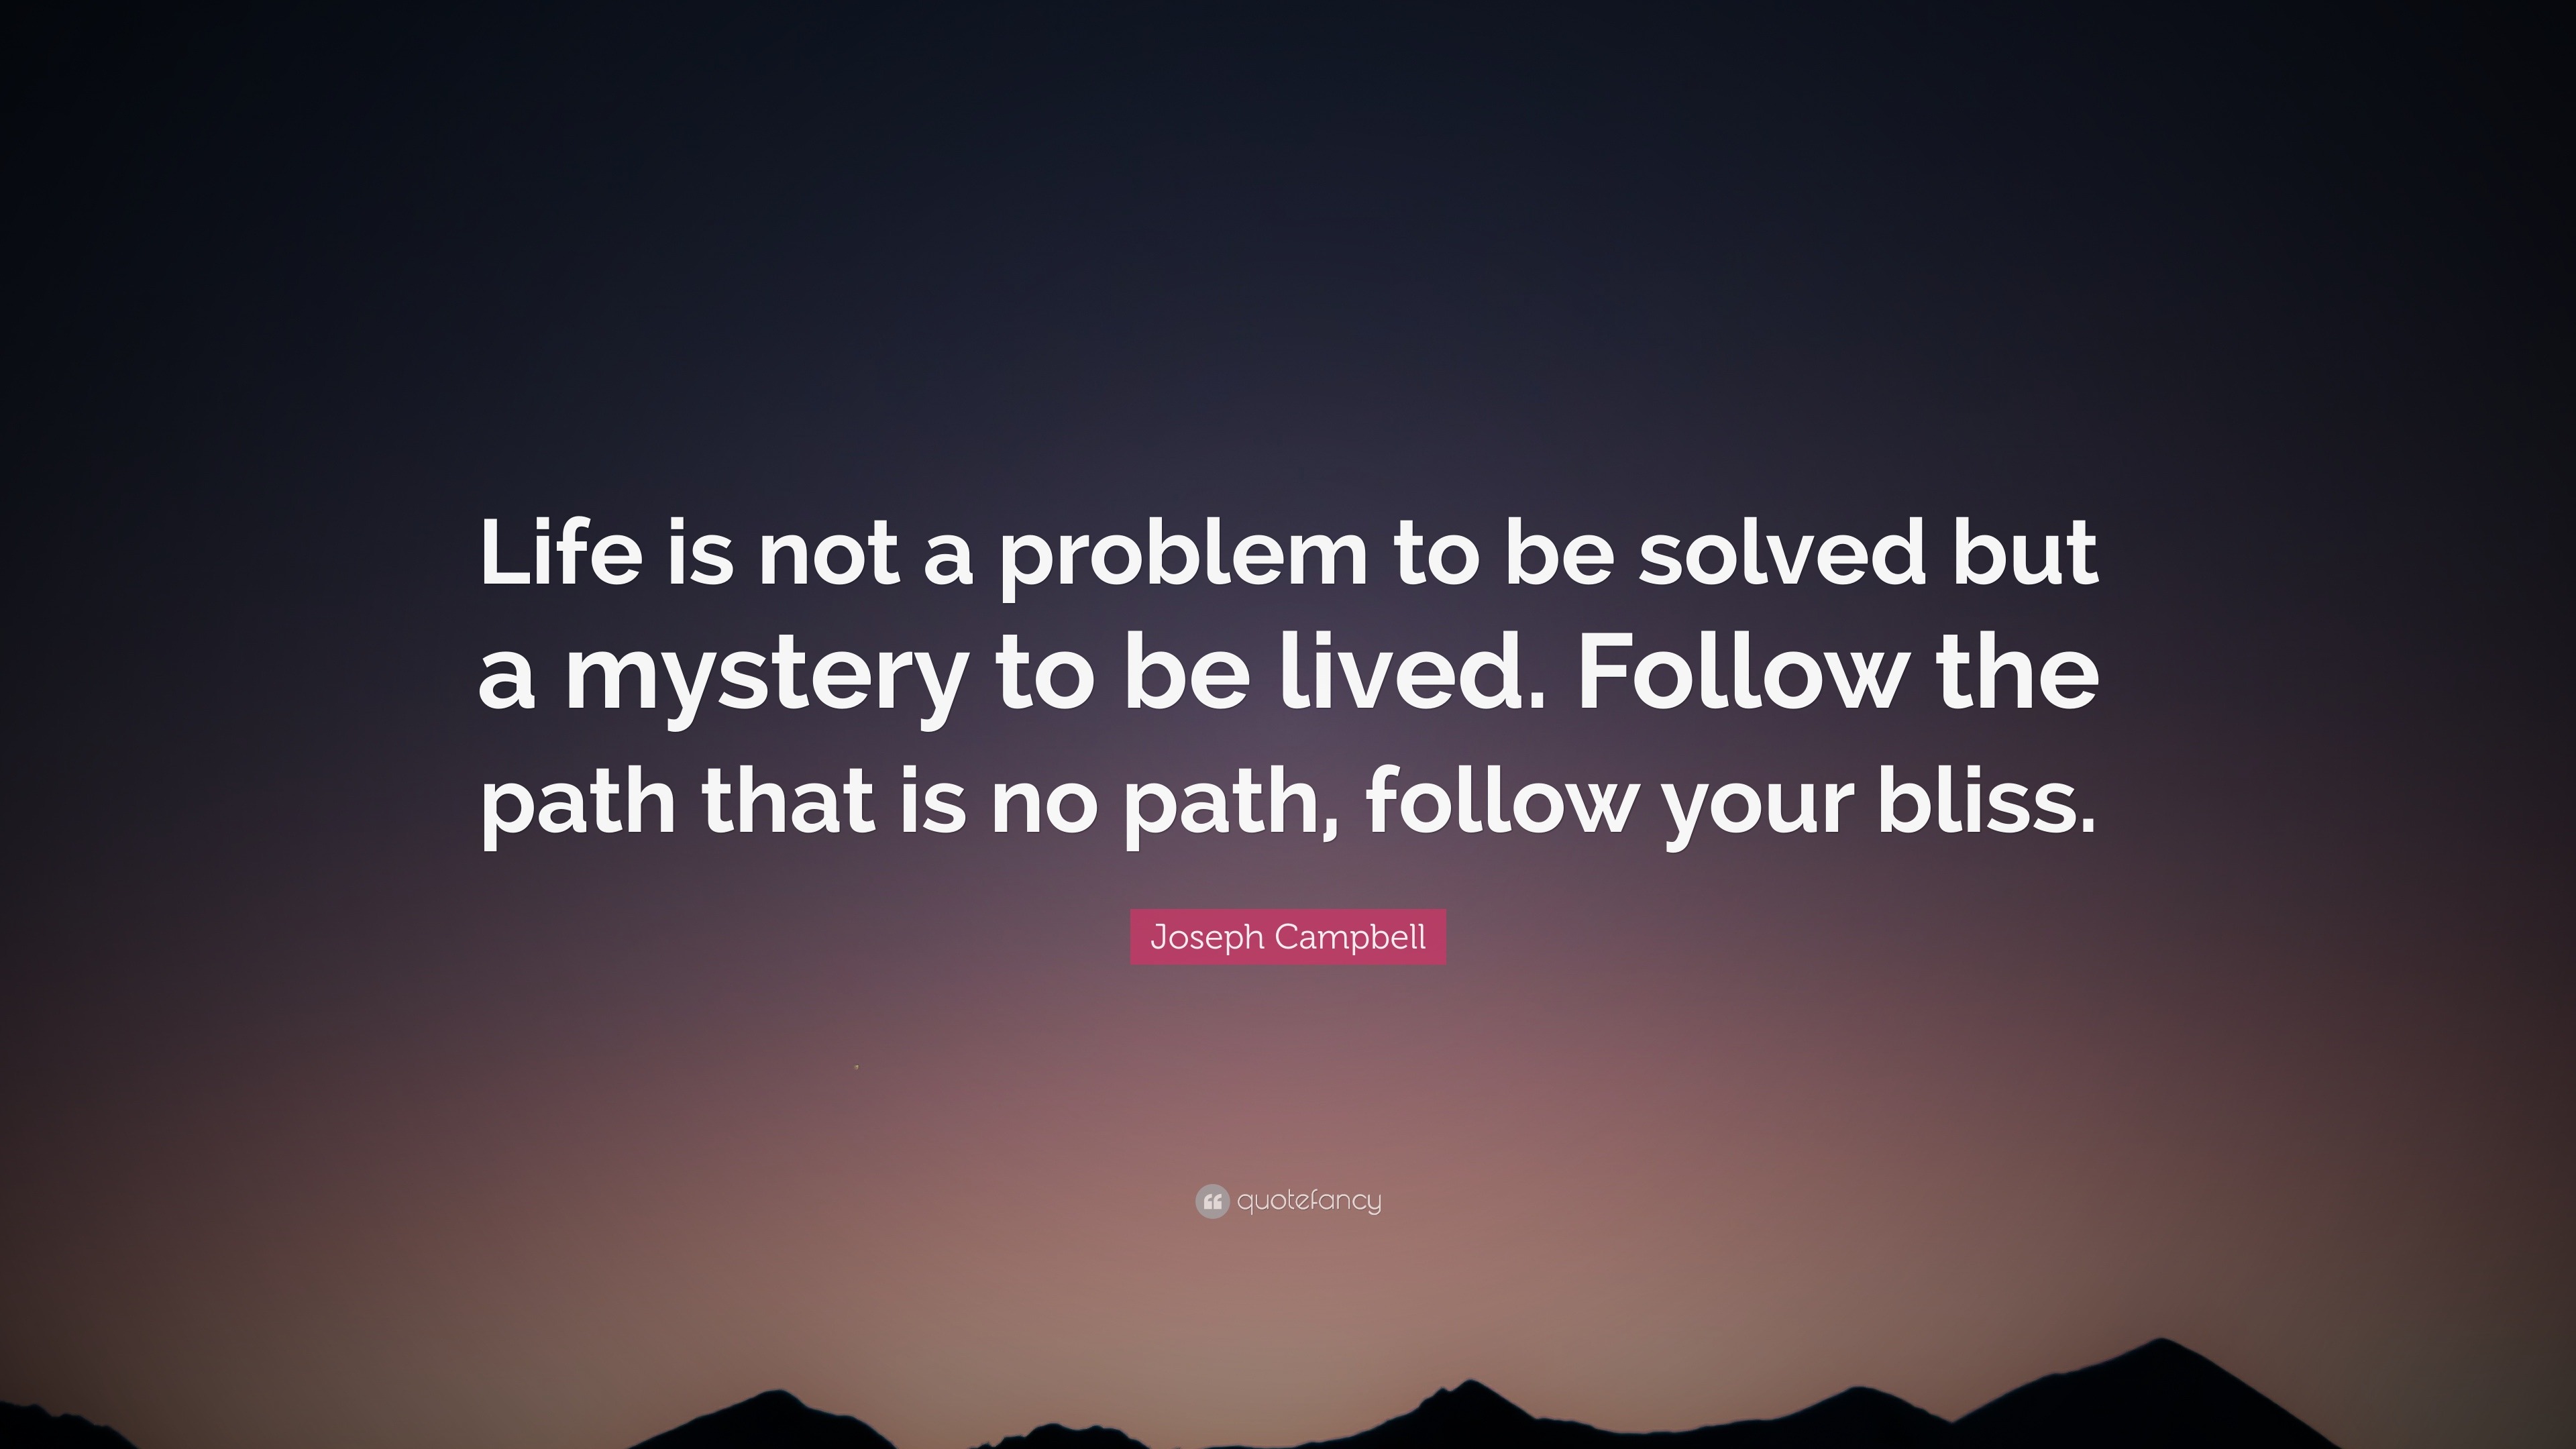 who said life is a mystery to be lived not a problem to be solved